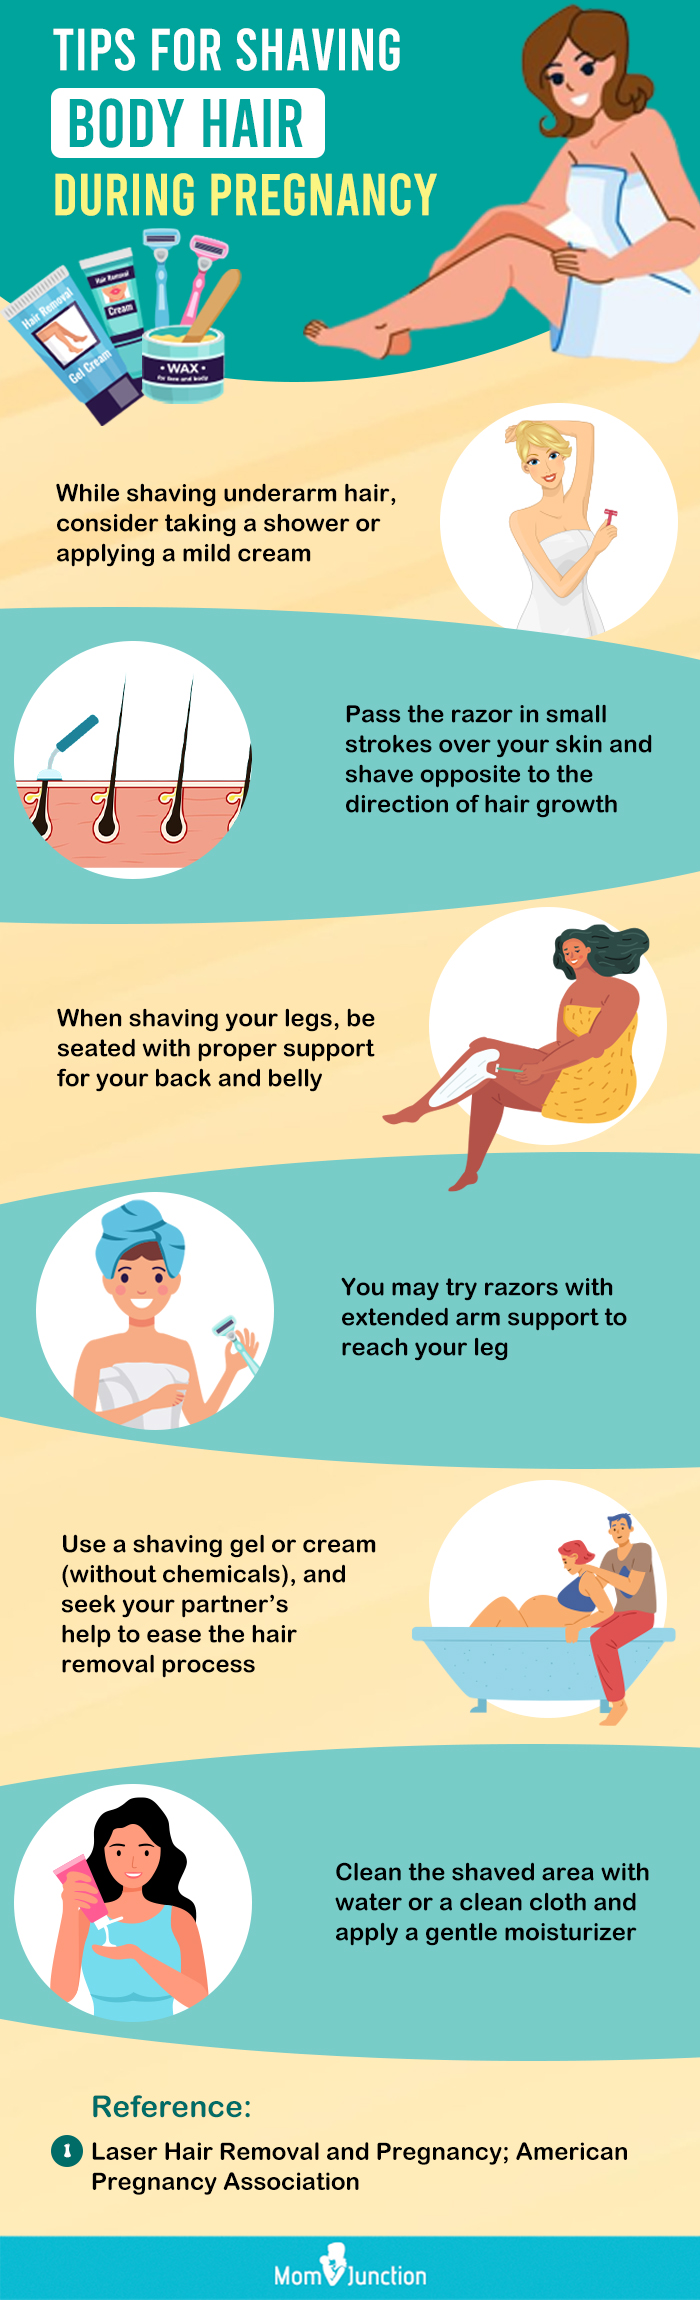 Shaving When Pregnant: Should You Shave Your Pubic Hair?